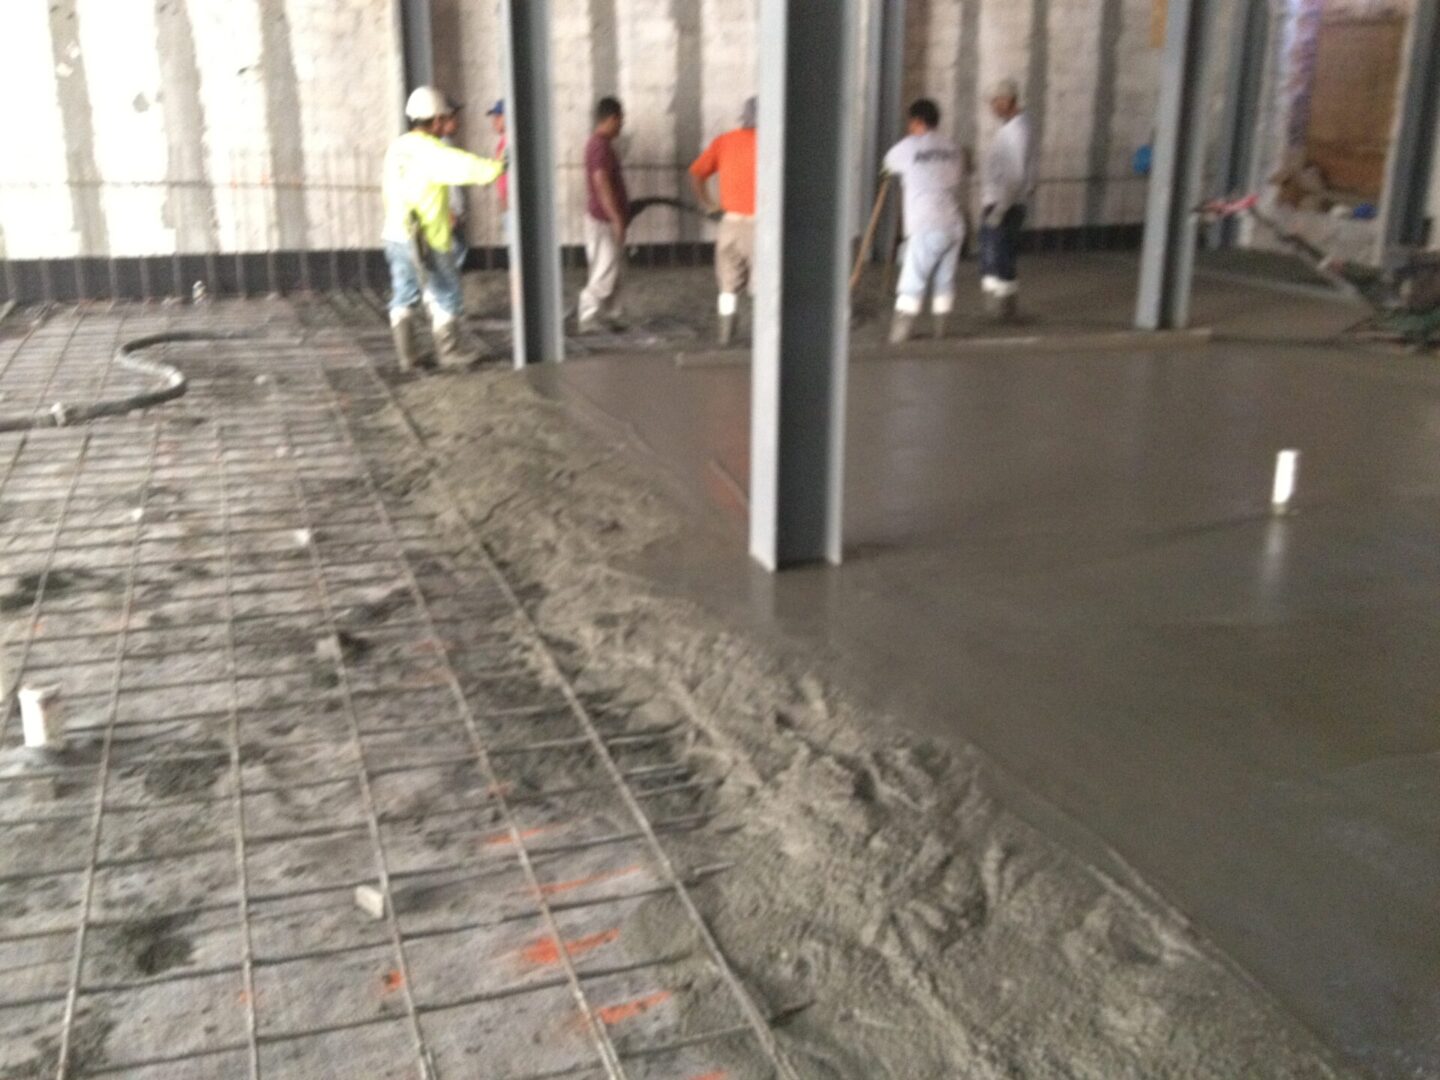 Closeup shot of the people working on slab on the display